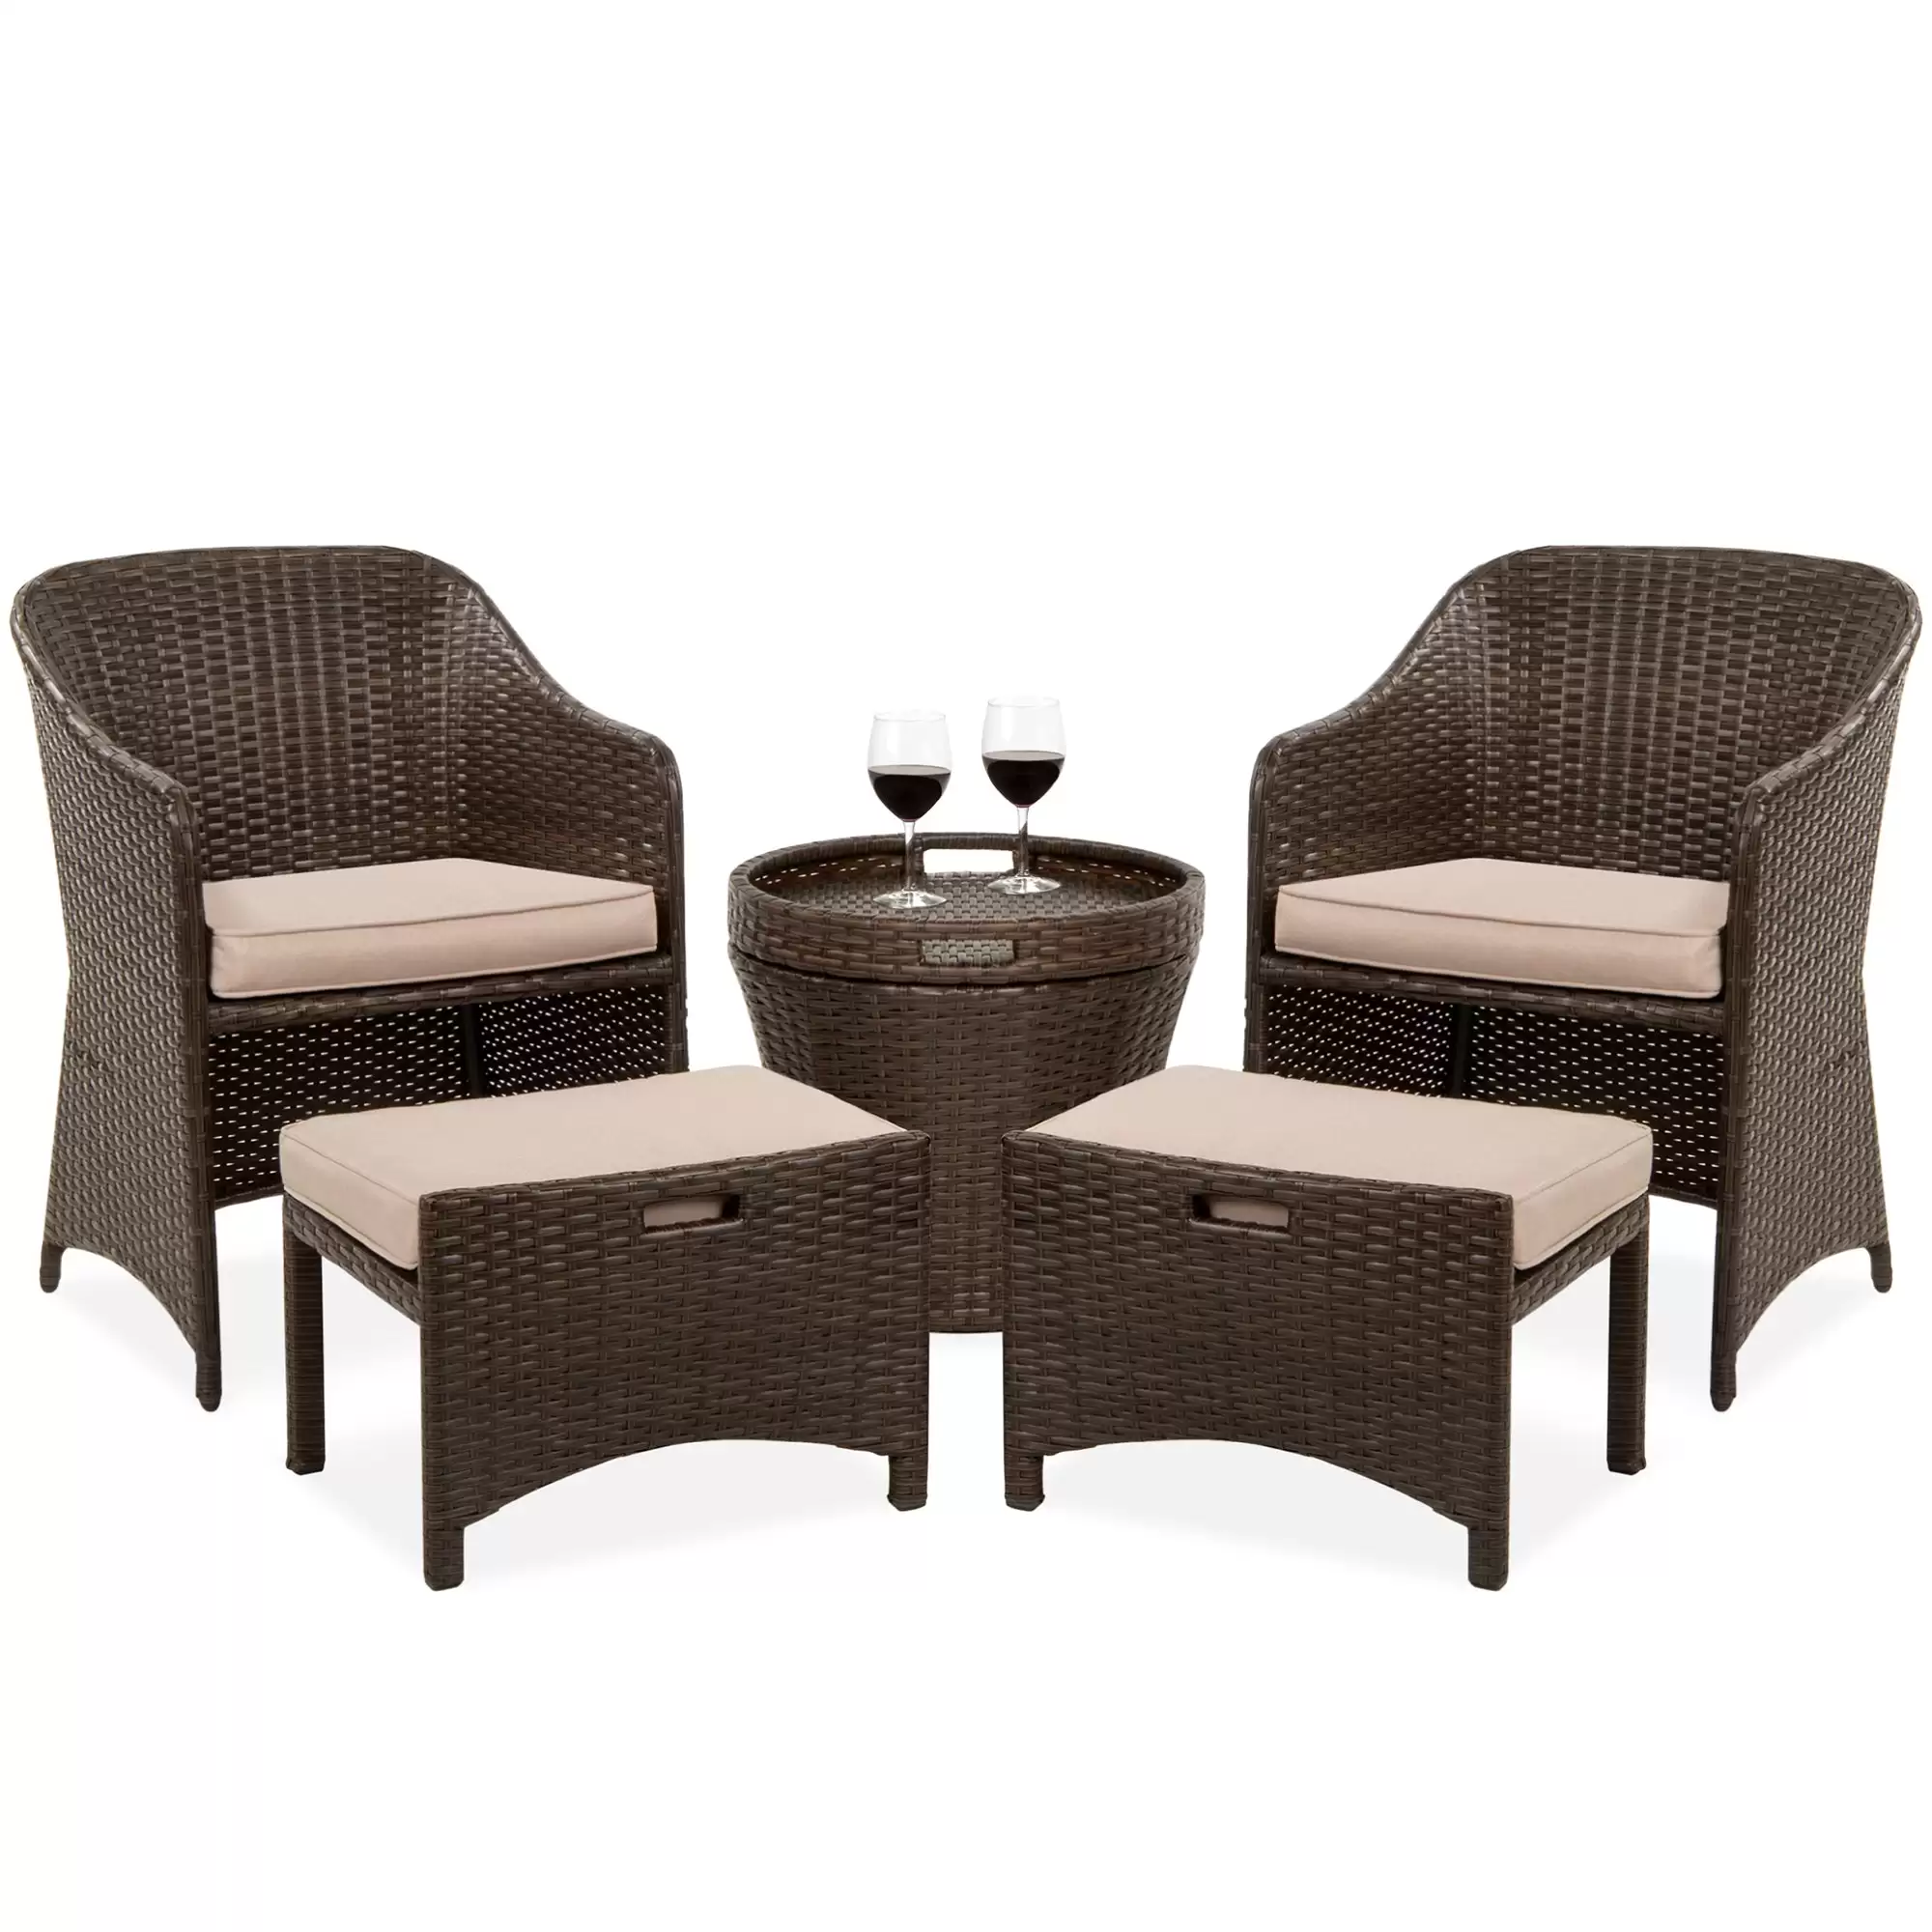 Pay $349.99 5-Piece Outdoor Wicker Bistro Set W/ Side Storage Table At Bestchoiceproducts